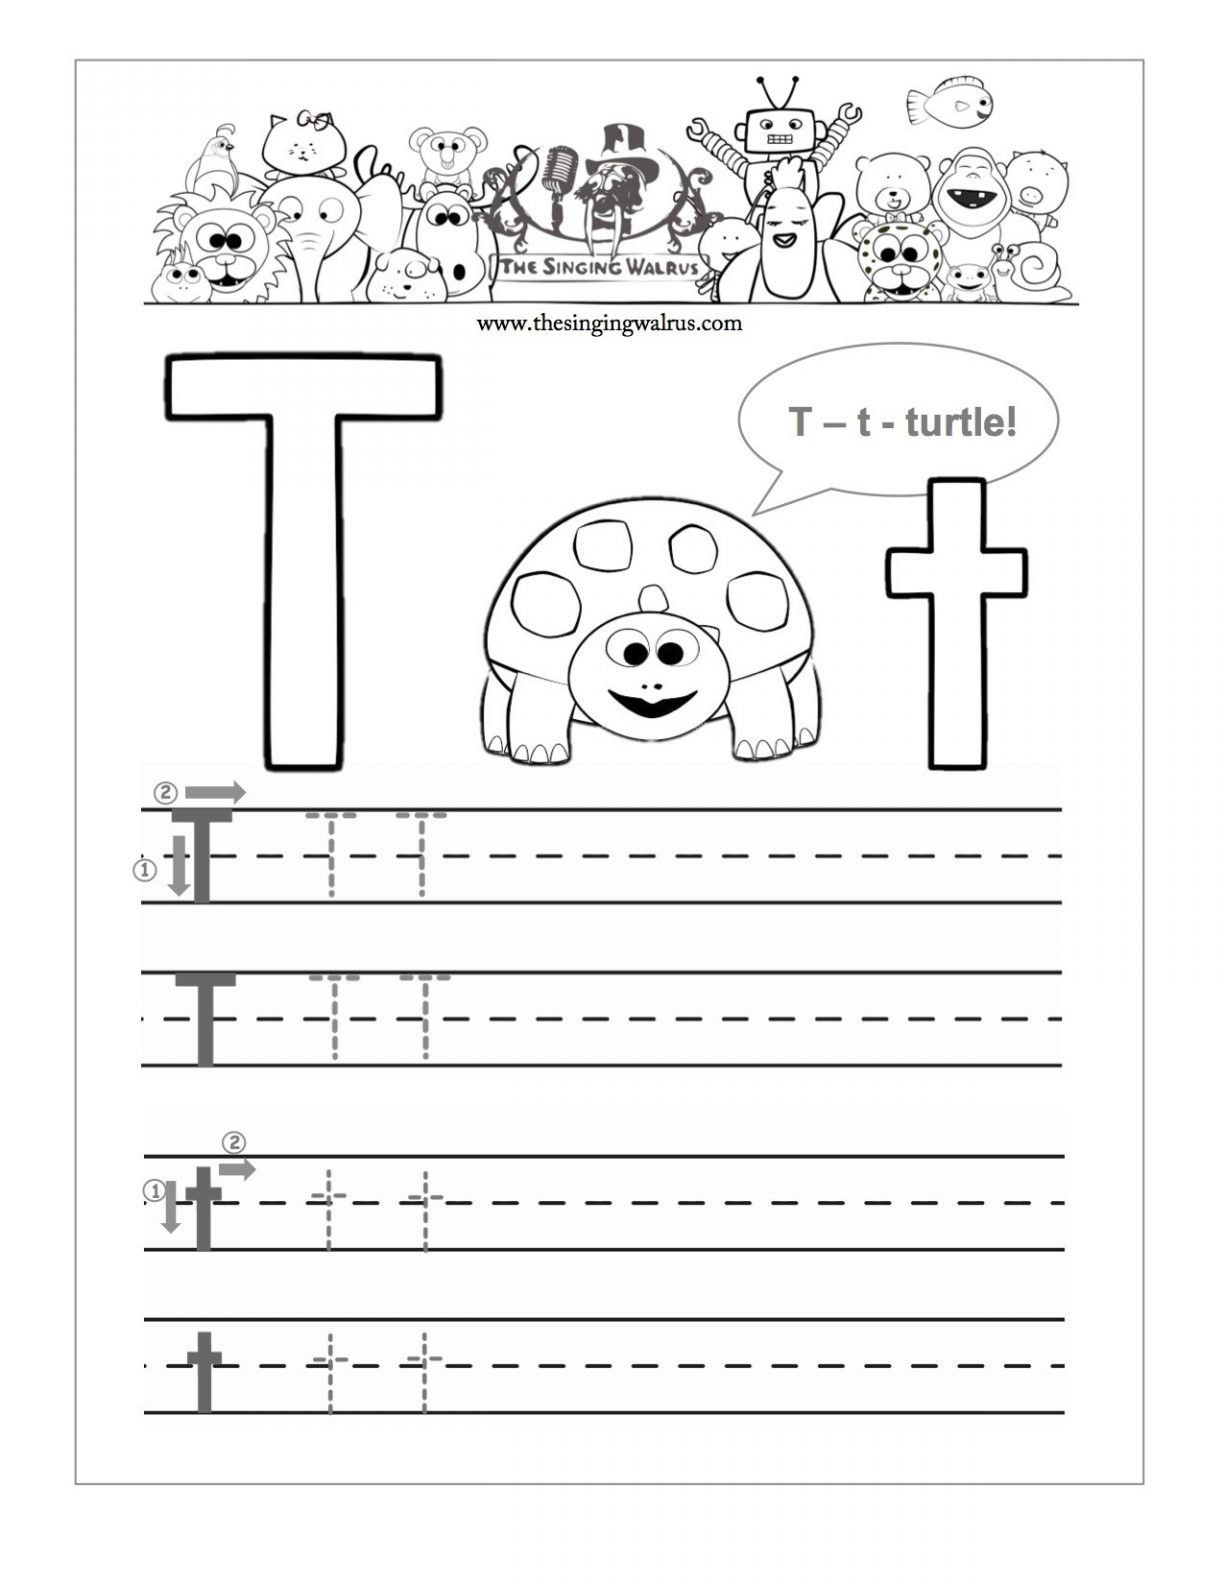 20 Learning The Letter T Worksheets | Kittybabylove throughout Letter T Worksheets Free Printables